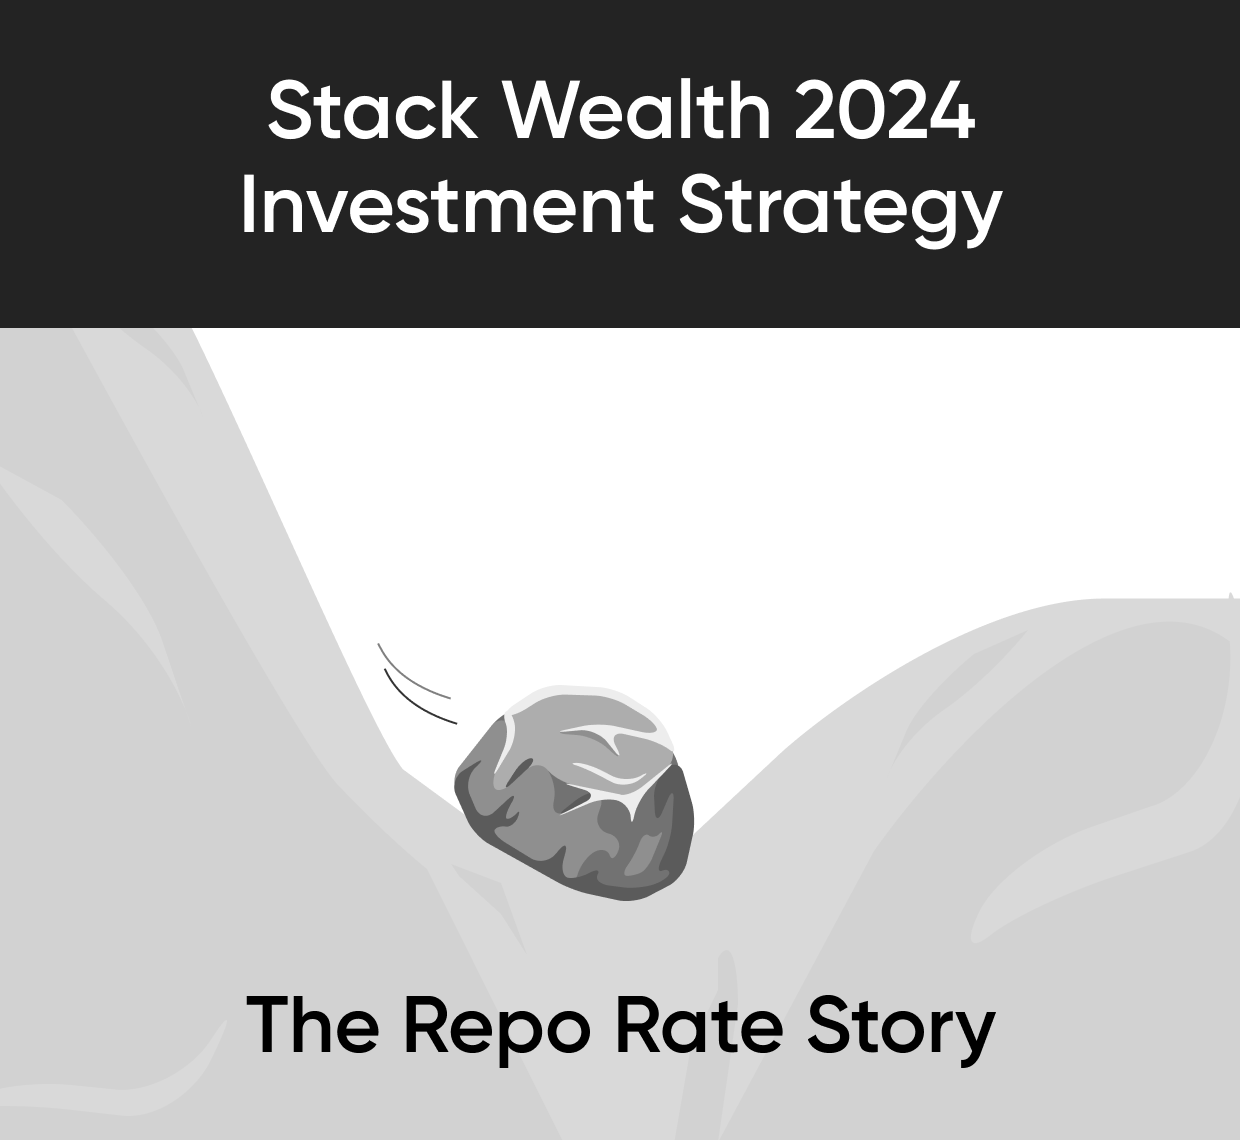 Stack Wealth 2024 Investment Strategy: The Repo Rate Story